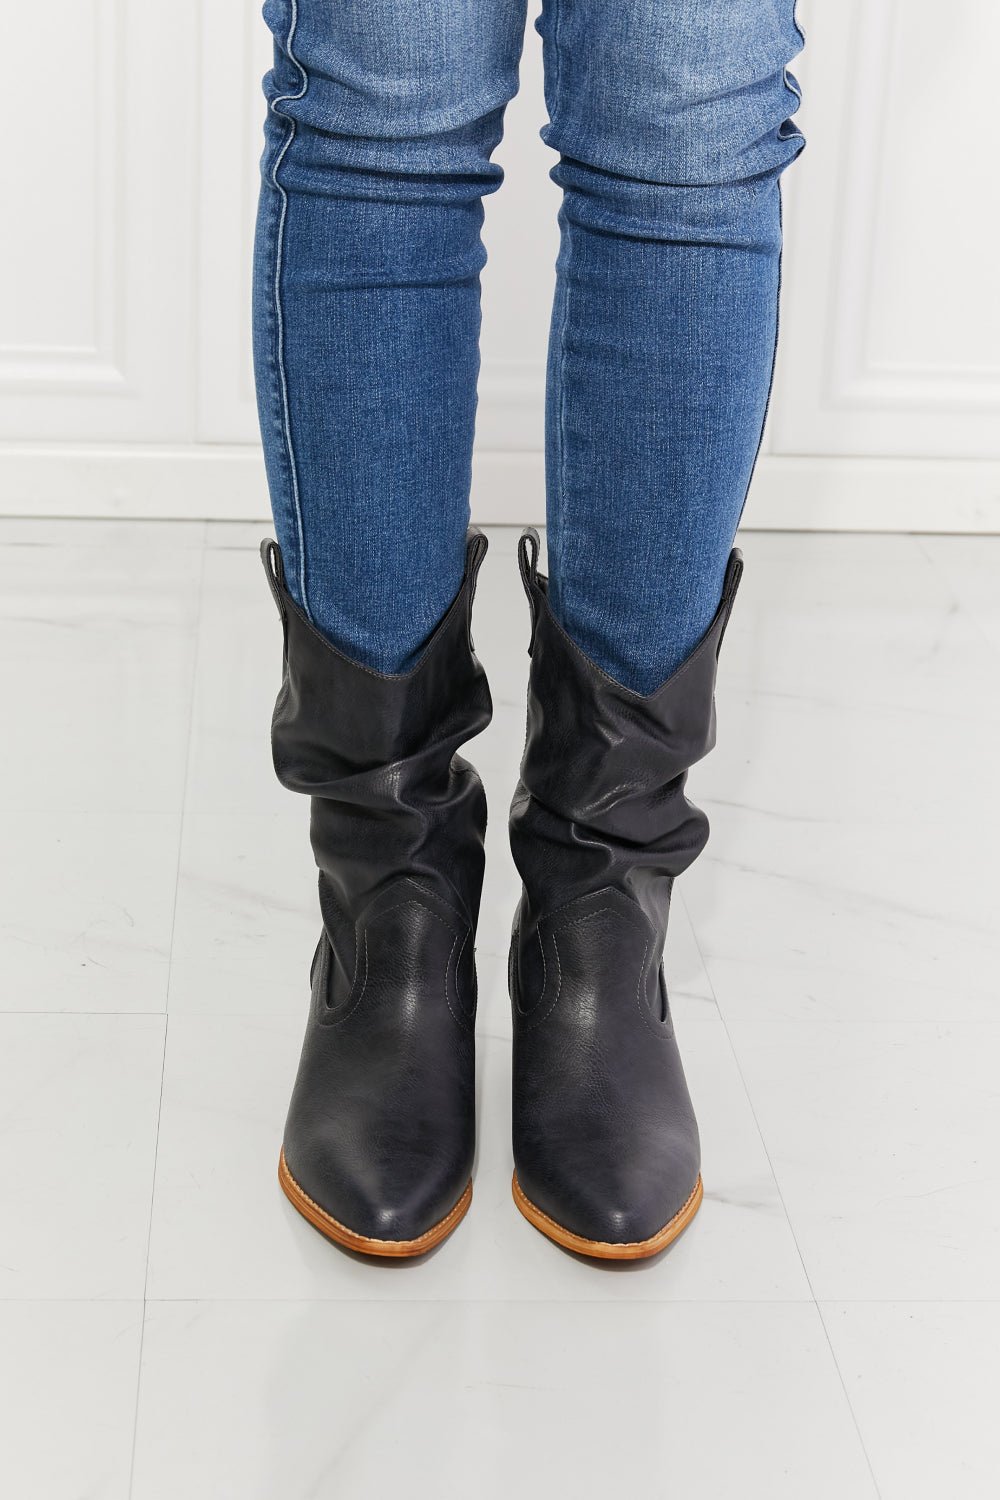 Vegan Leather Scrunch Cowgirl Boots in NavyCowboy BootsMelody